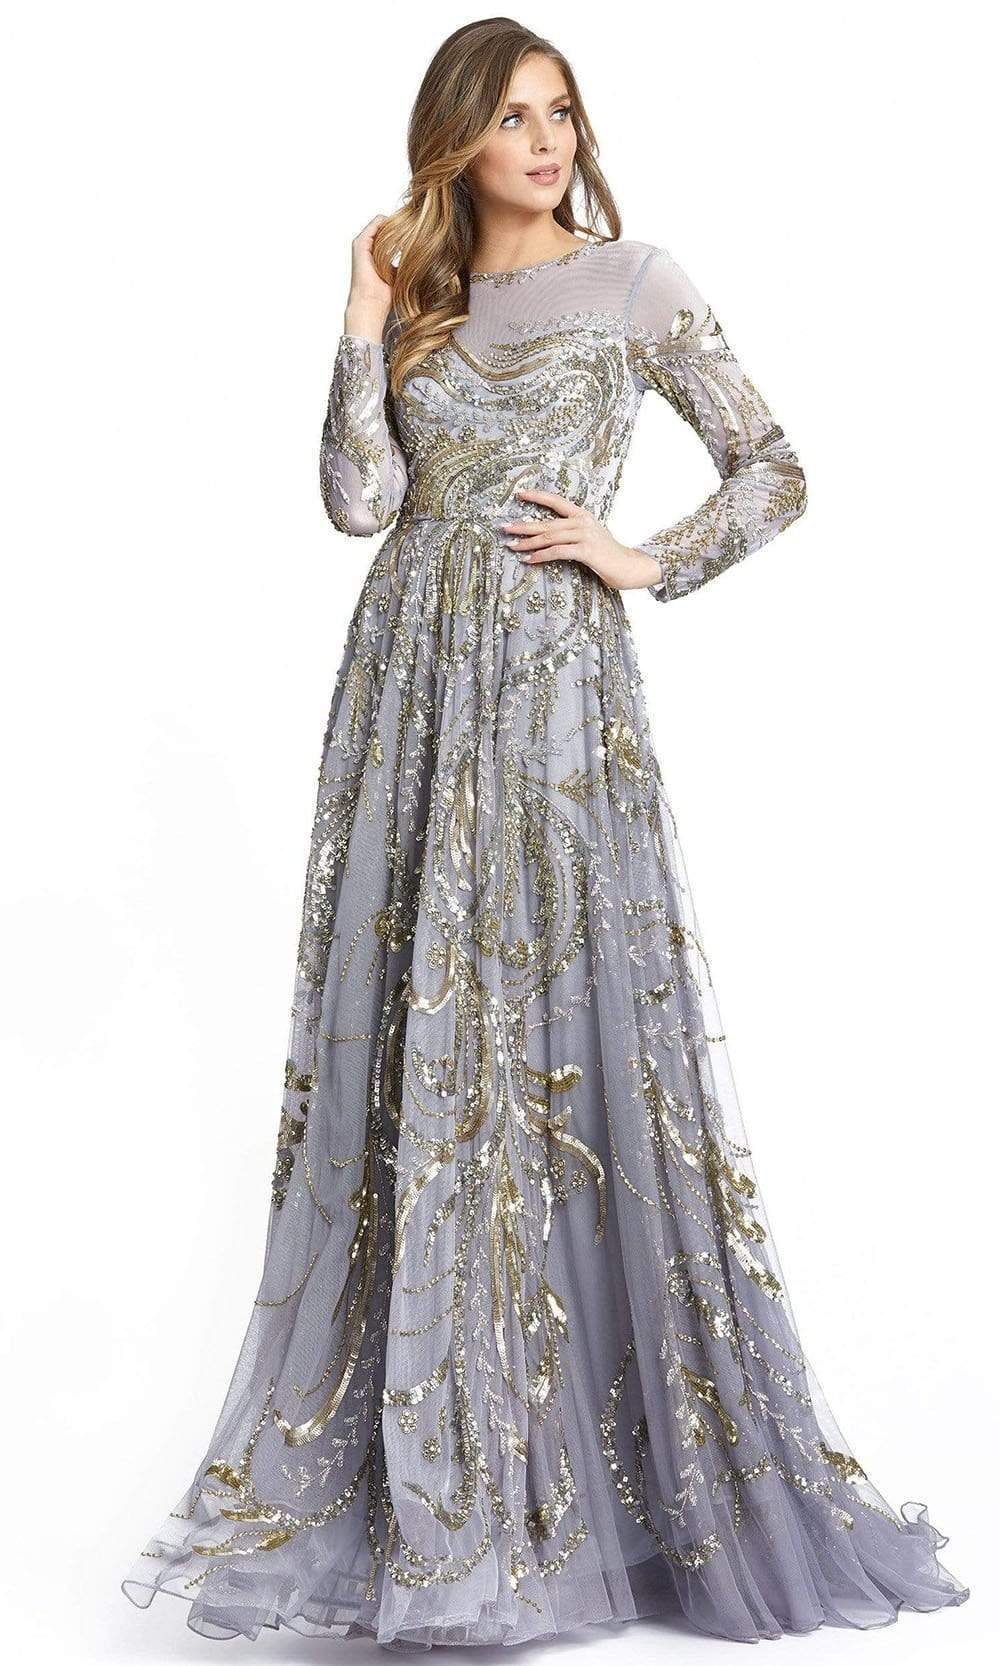 Image of Mac Duggal - 5217 Illusion Neckline Long Sleeve Mother of the Bride Gown